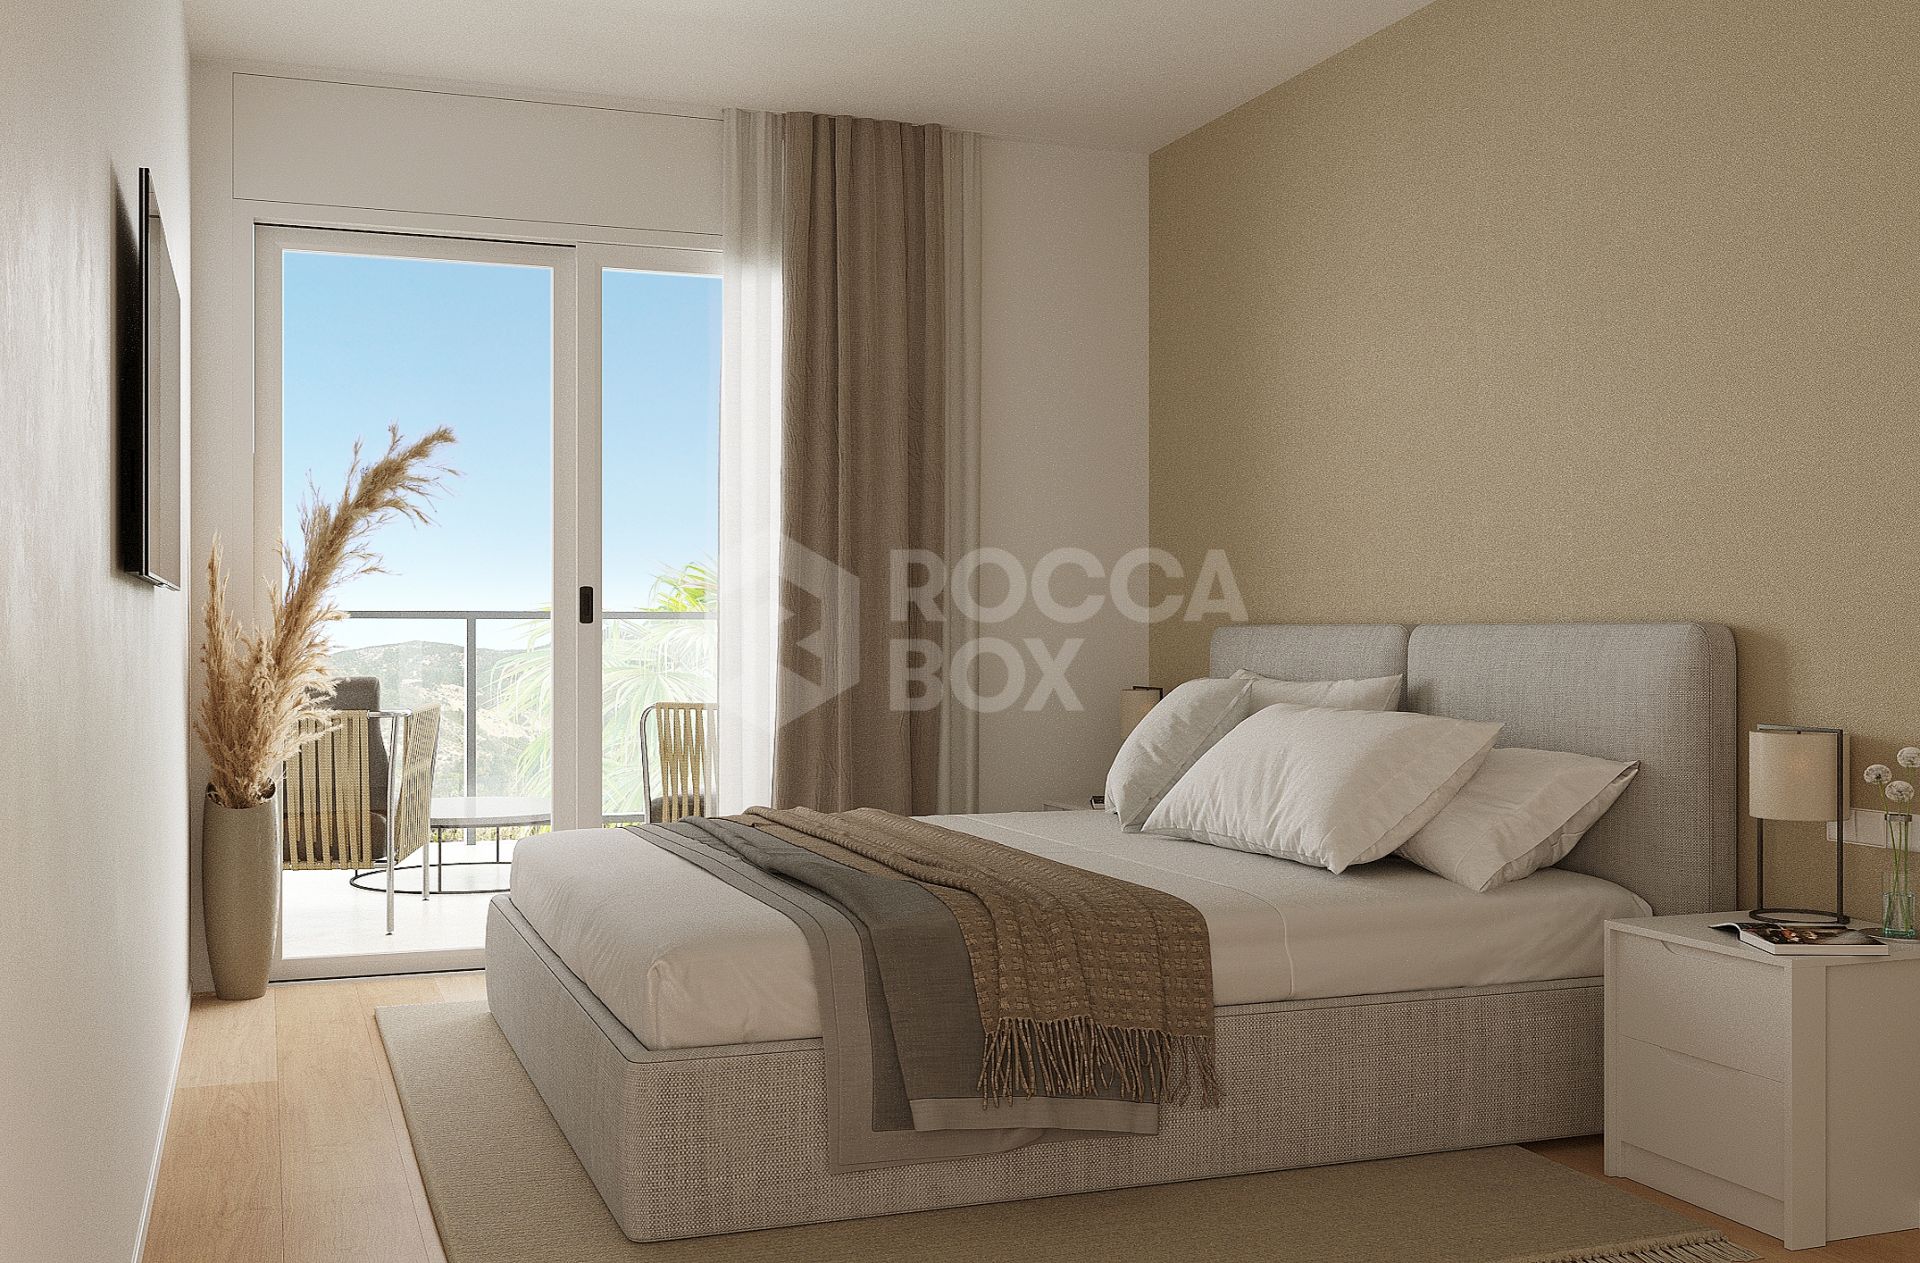 Breeze, modern apartments and townhouses on the sunny Costa Blanca.